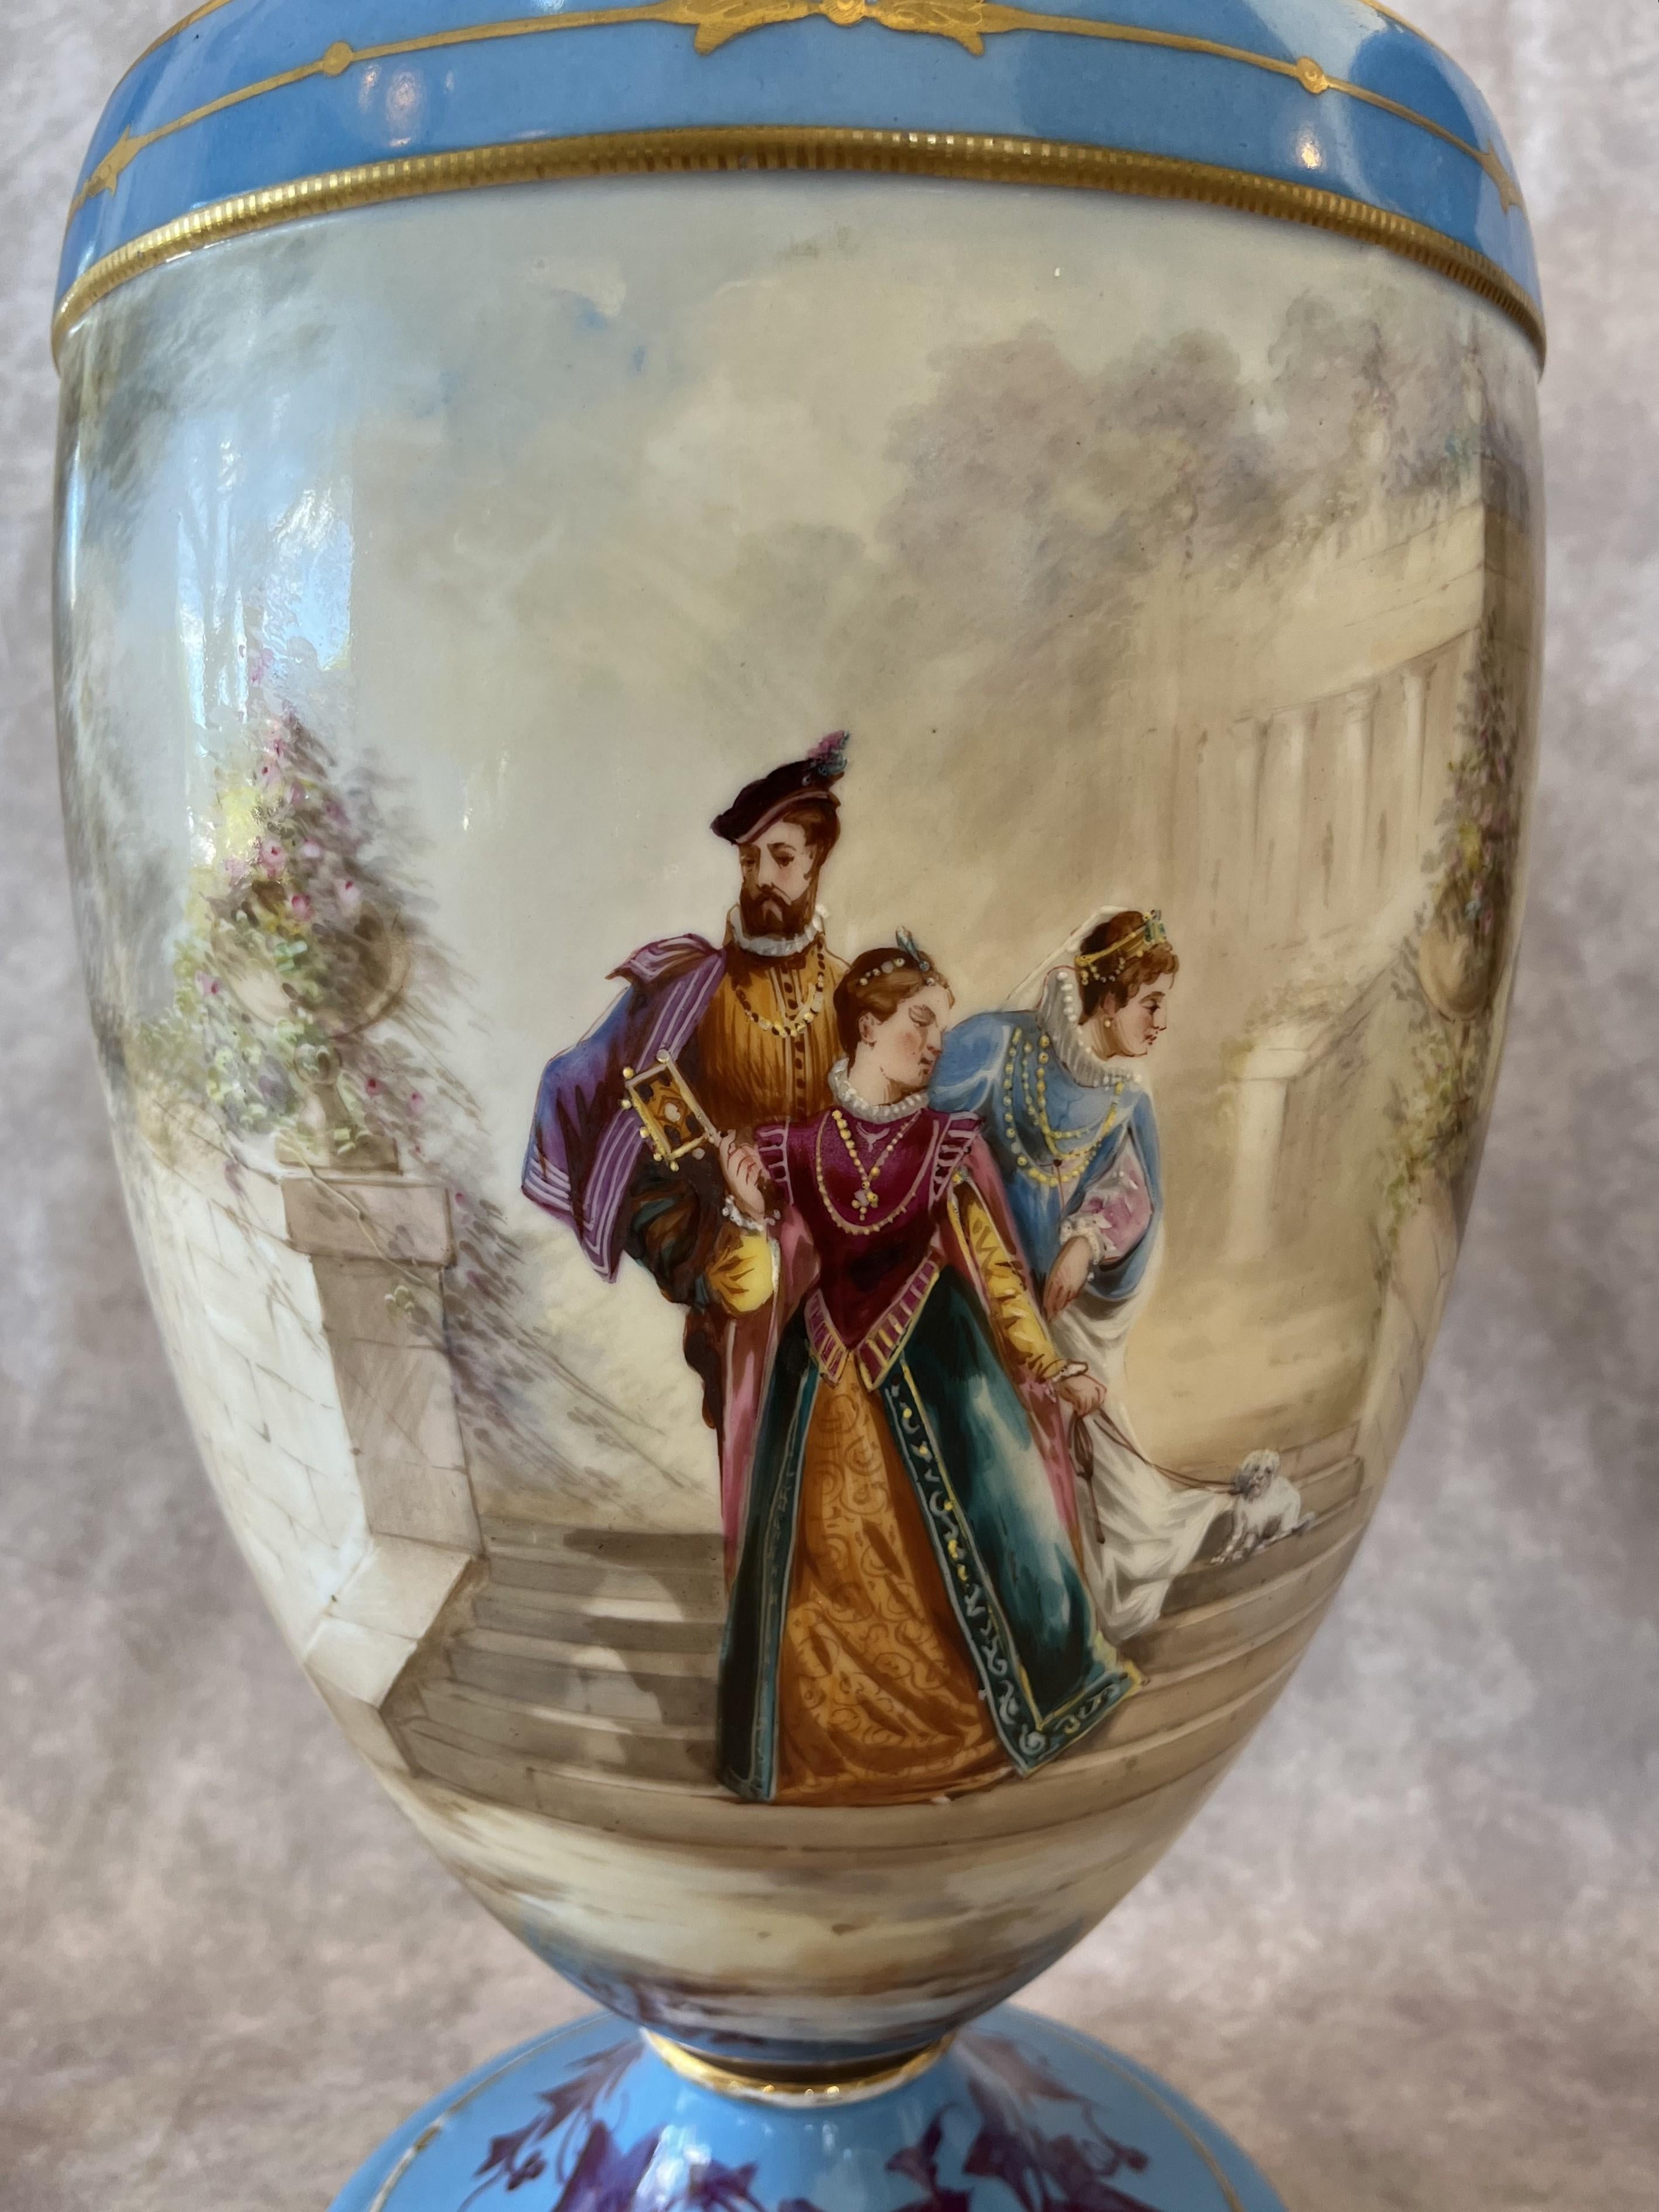 In the style of the manufacture the Sevres, lovely pair of porcelain vases with hand painted scenes on a light blue background.